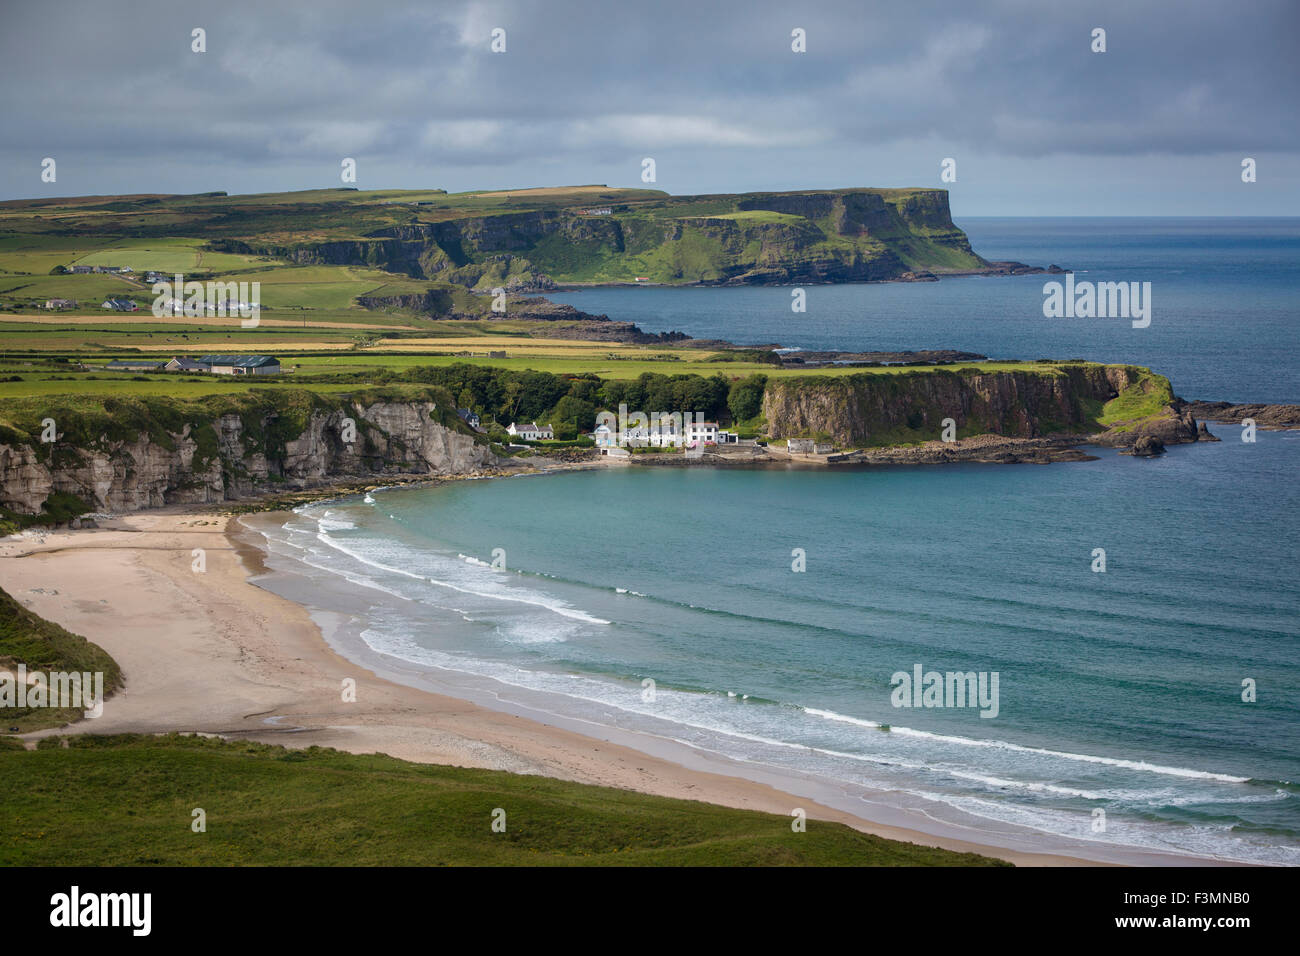 View over village of Portbraddan and the north coast of County Antrim, Northern Ireland, UK Stock Photo